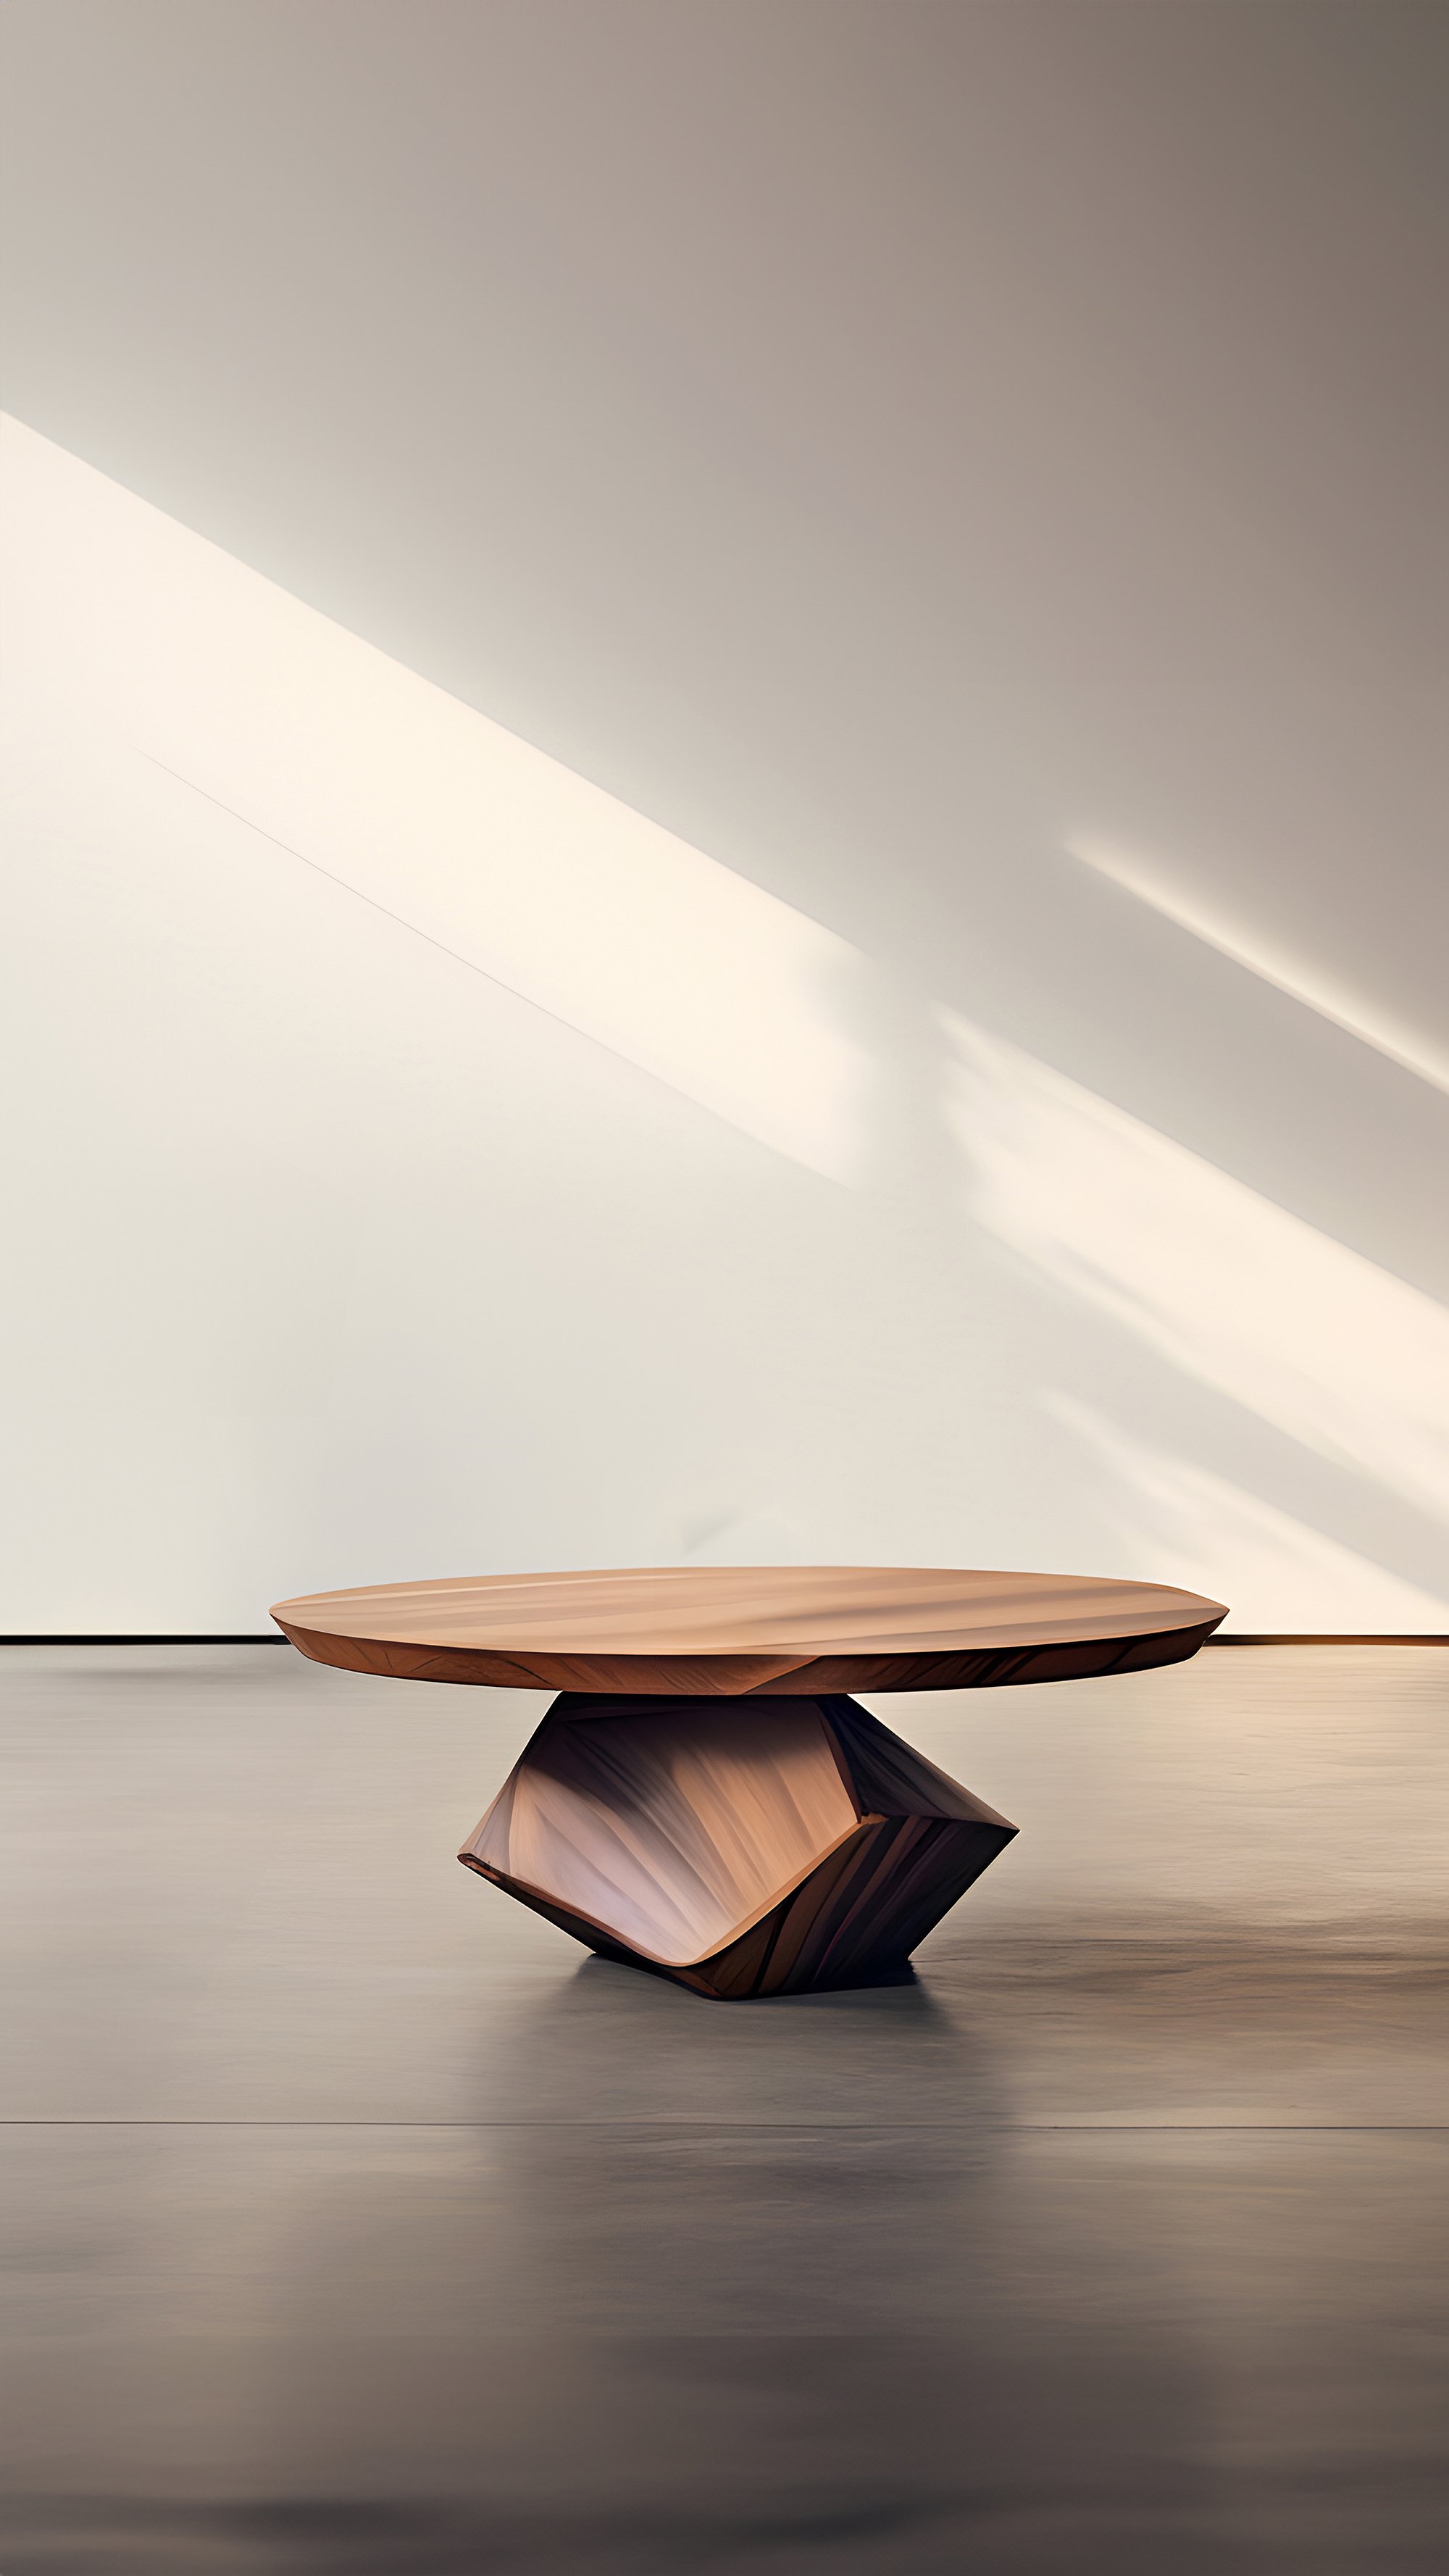 Sculptural Coffee Table Made of Solid Wood, Center Table Solace S43 by Joel Escalona — 8.jpg